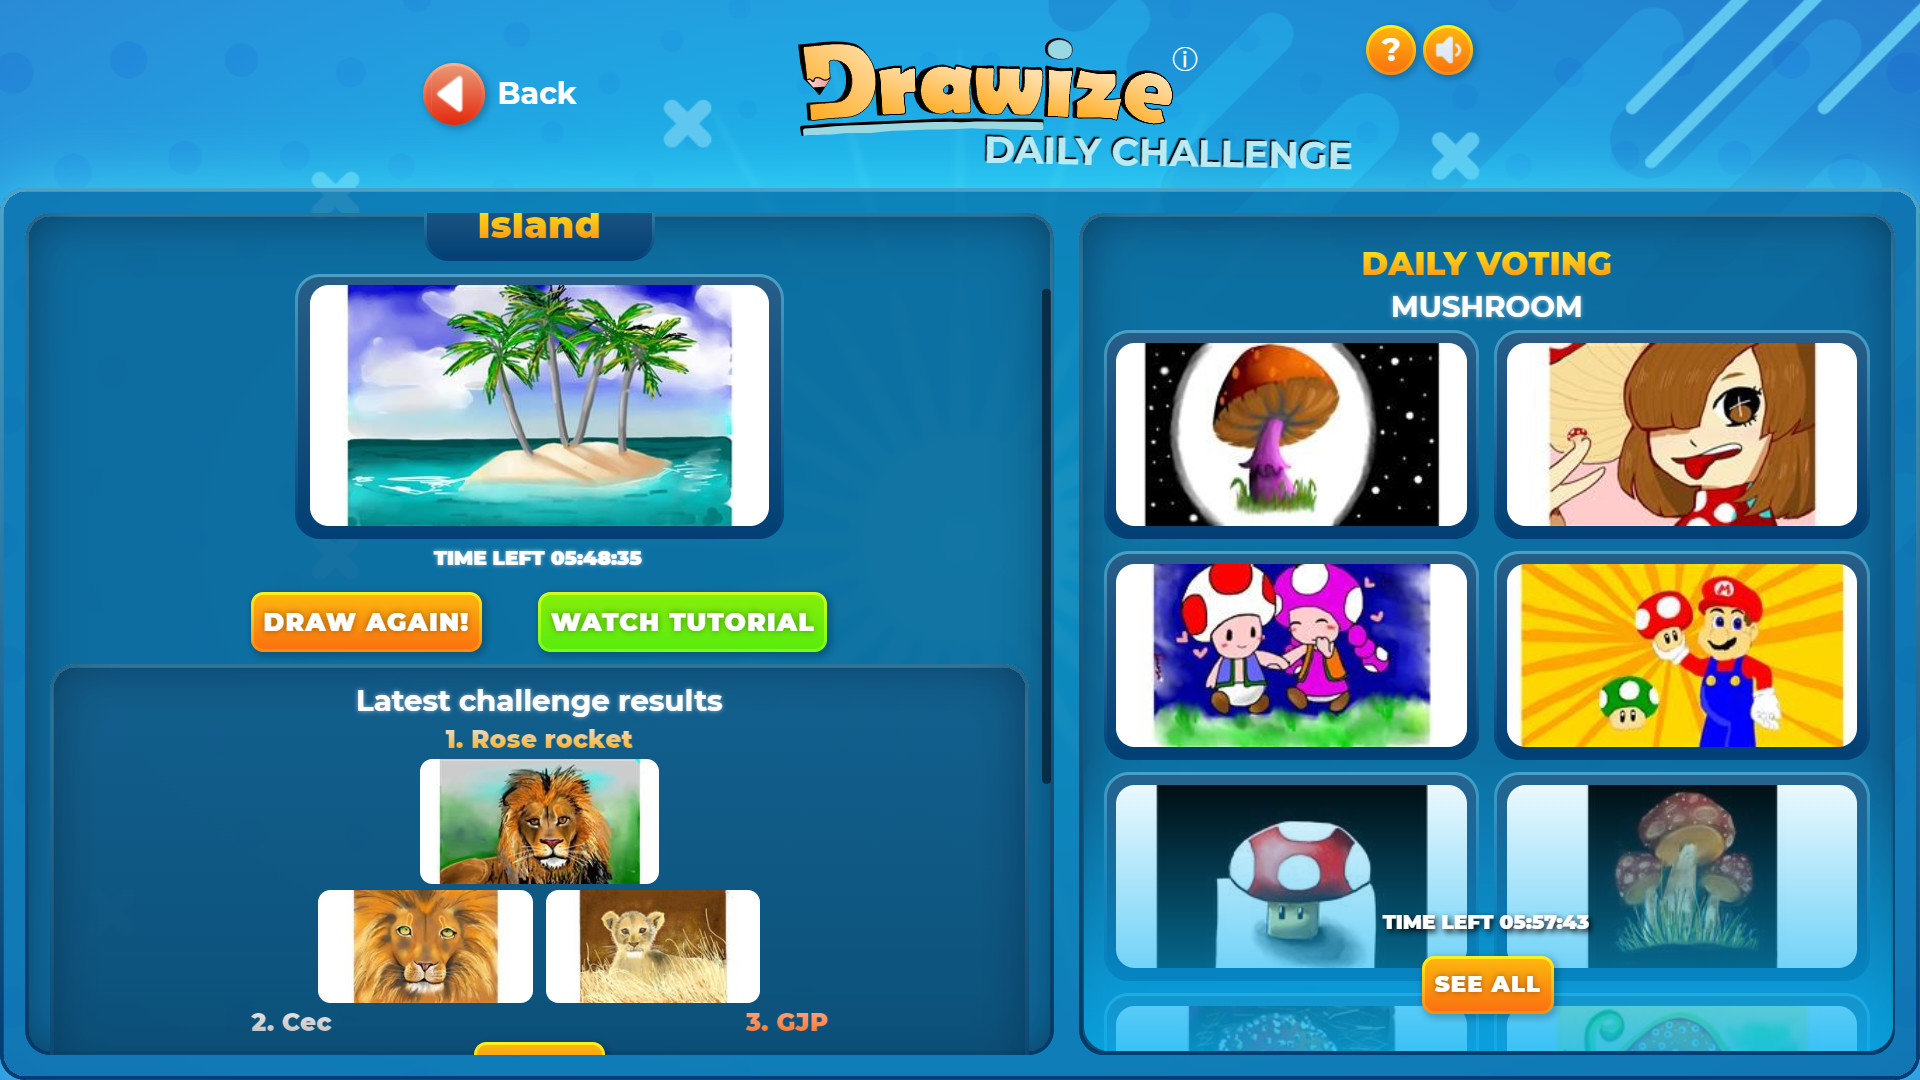 Gartic.io - Draw, Guess, WIN - Apps on Google Play